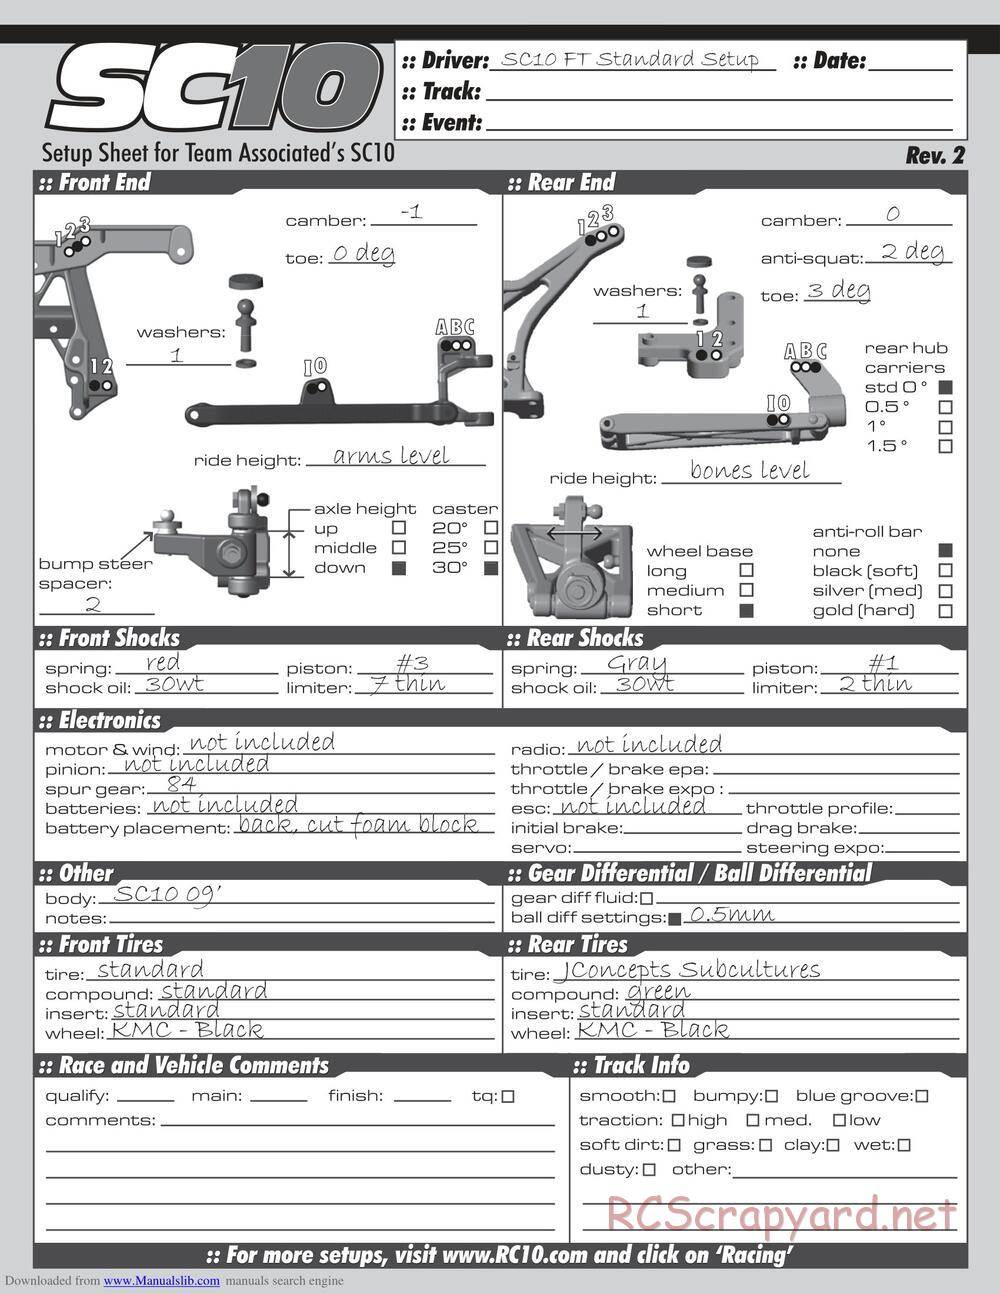 Team Associated - SC10 Factory Team - Manual - Page 31